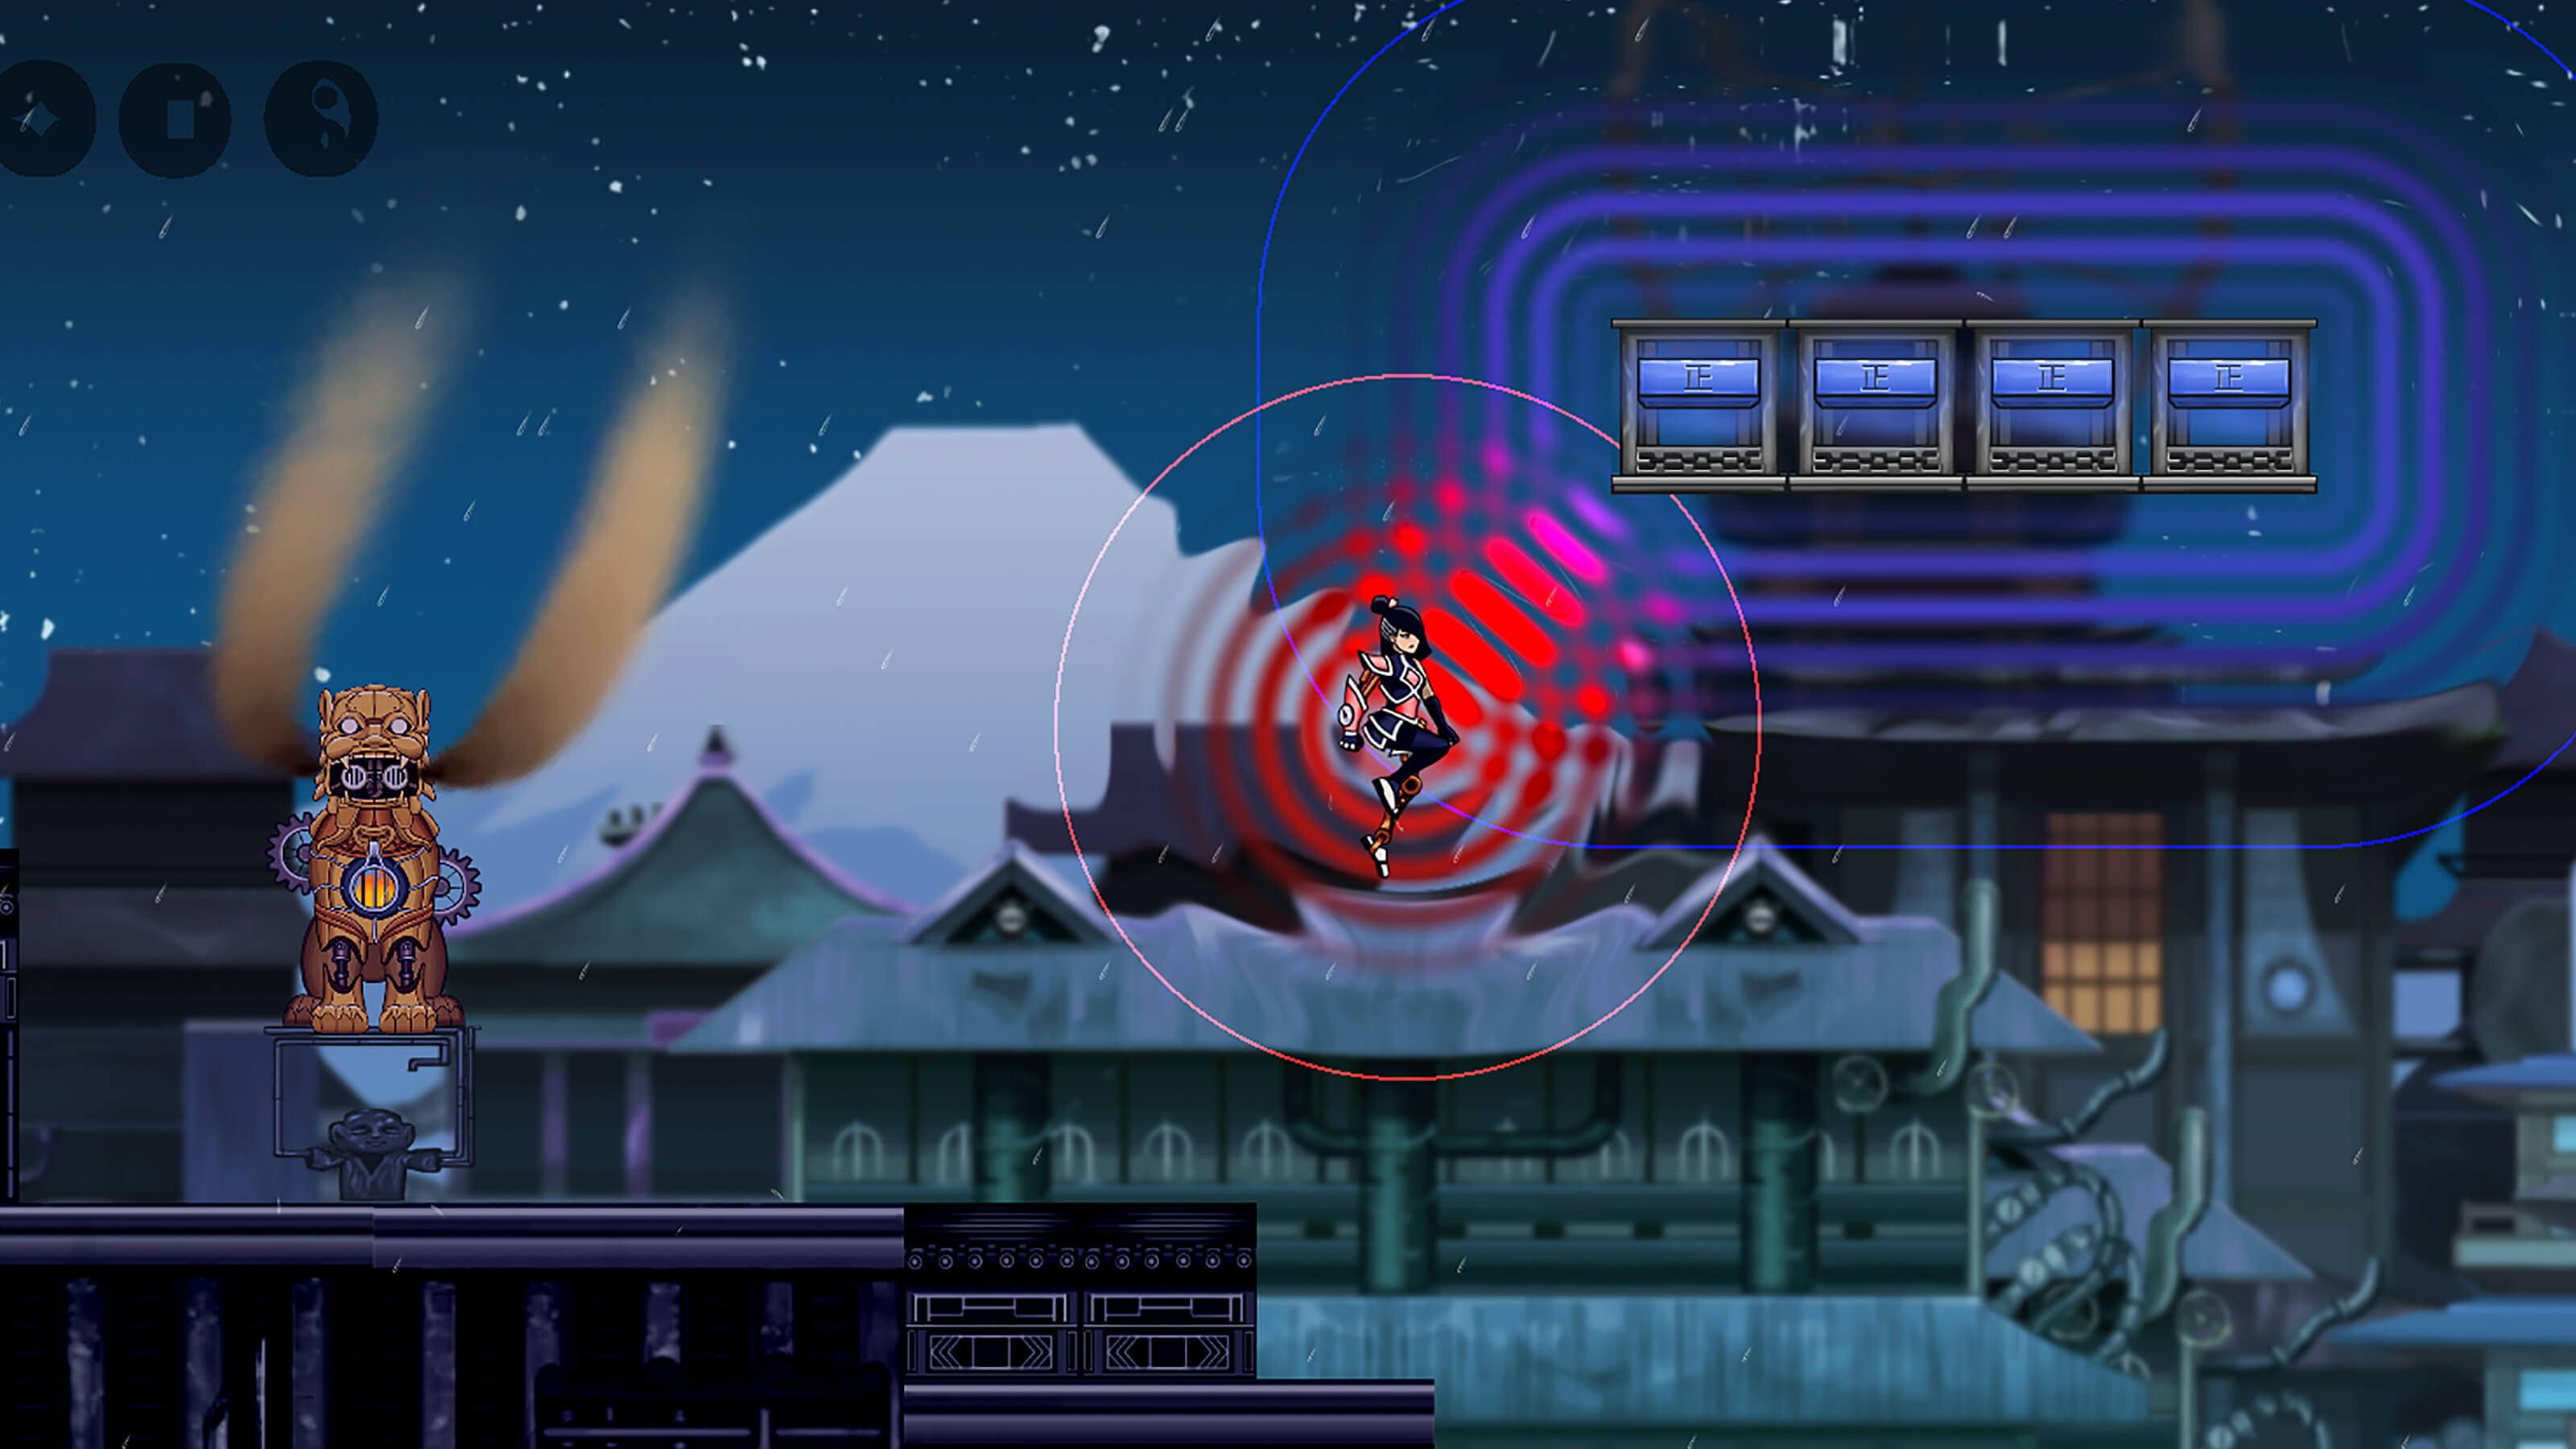 The game's half-automaton hero leaps through the air emanating red magnetic waves.